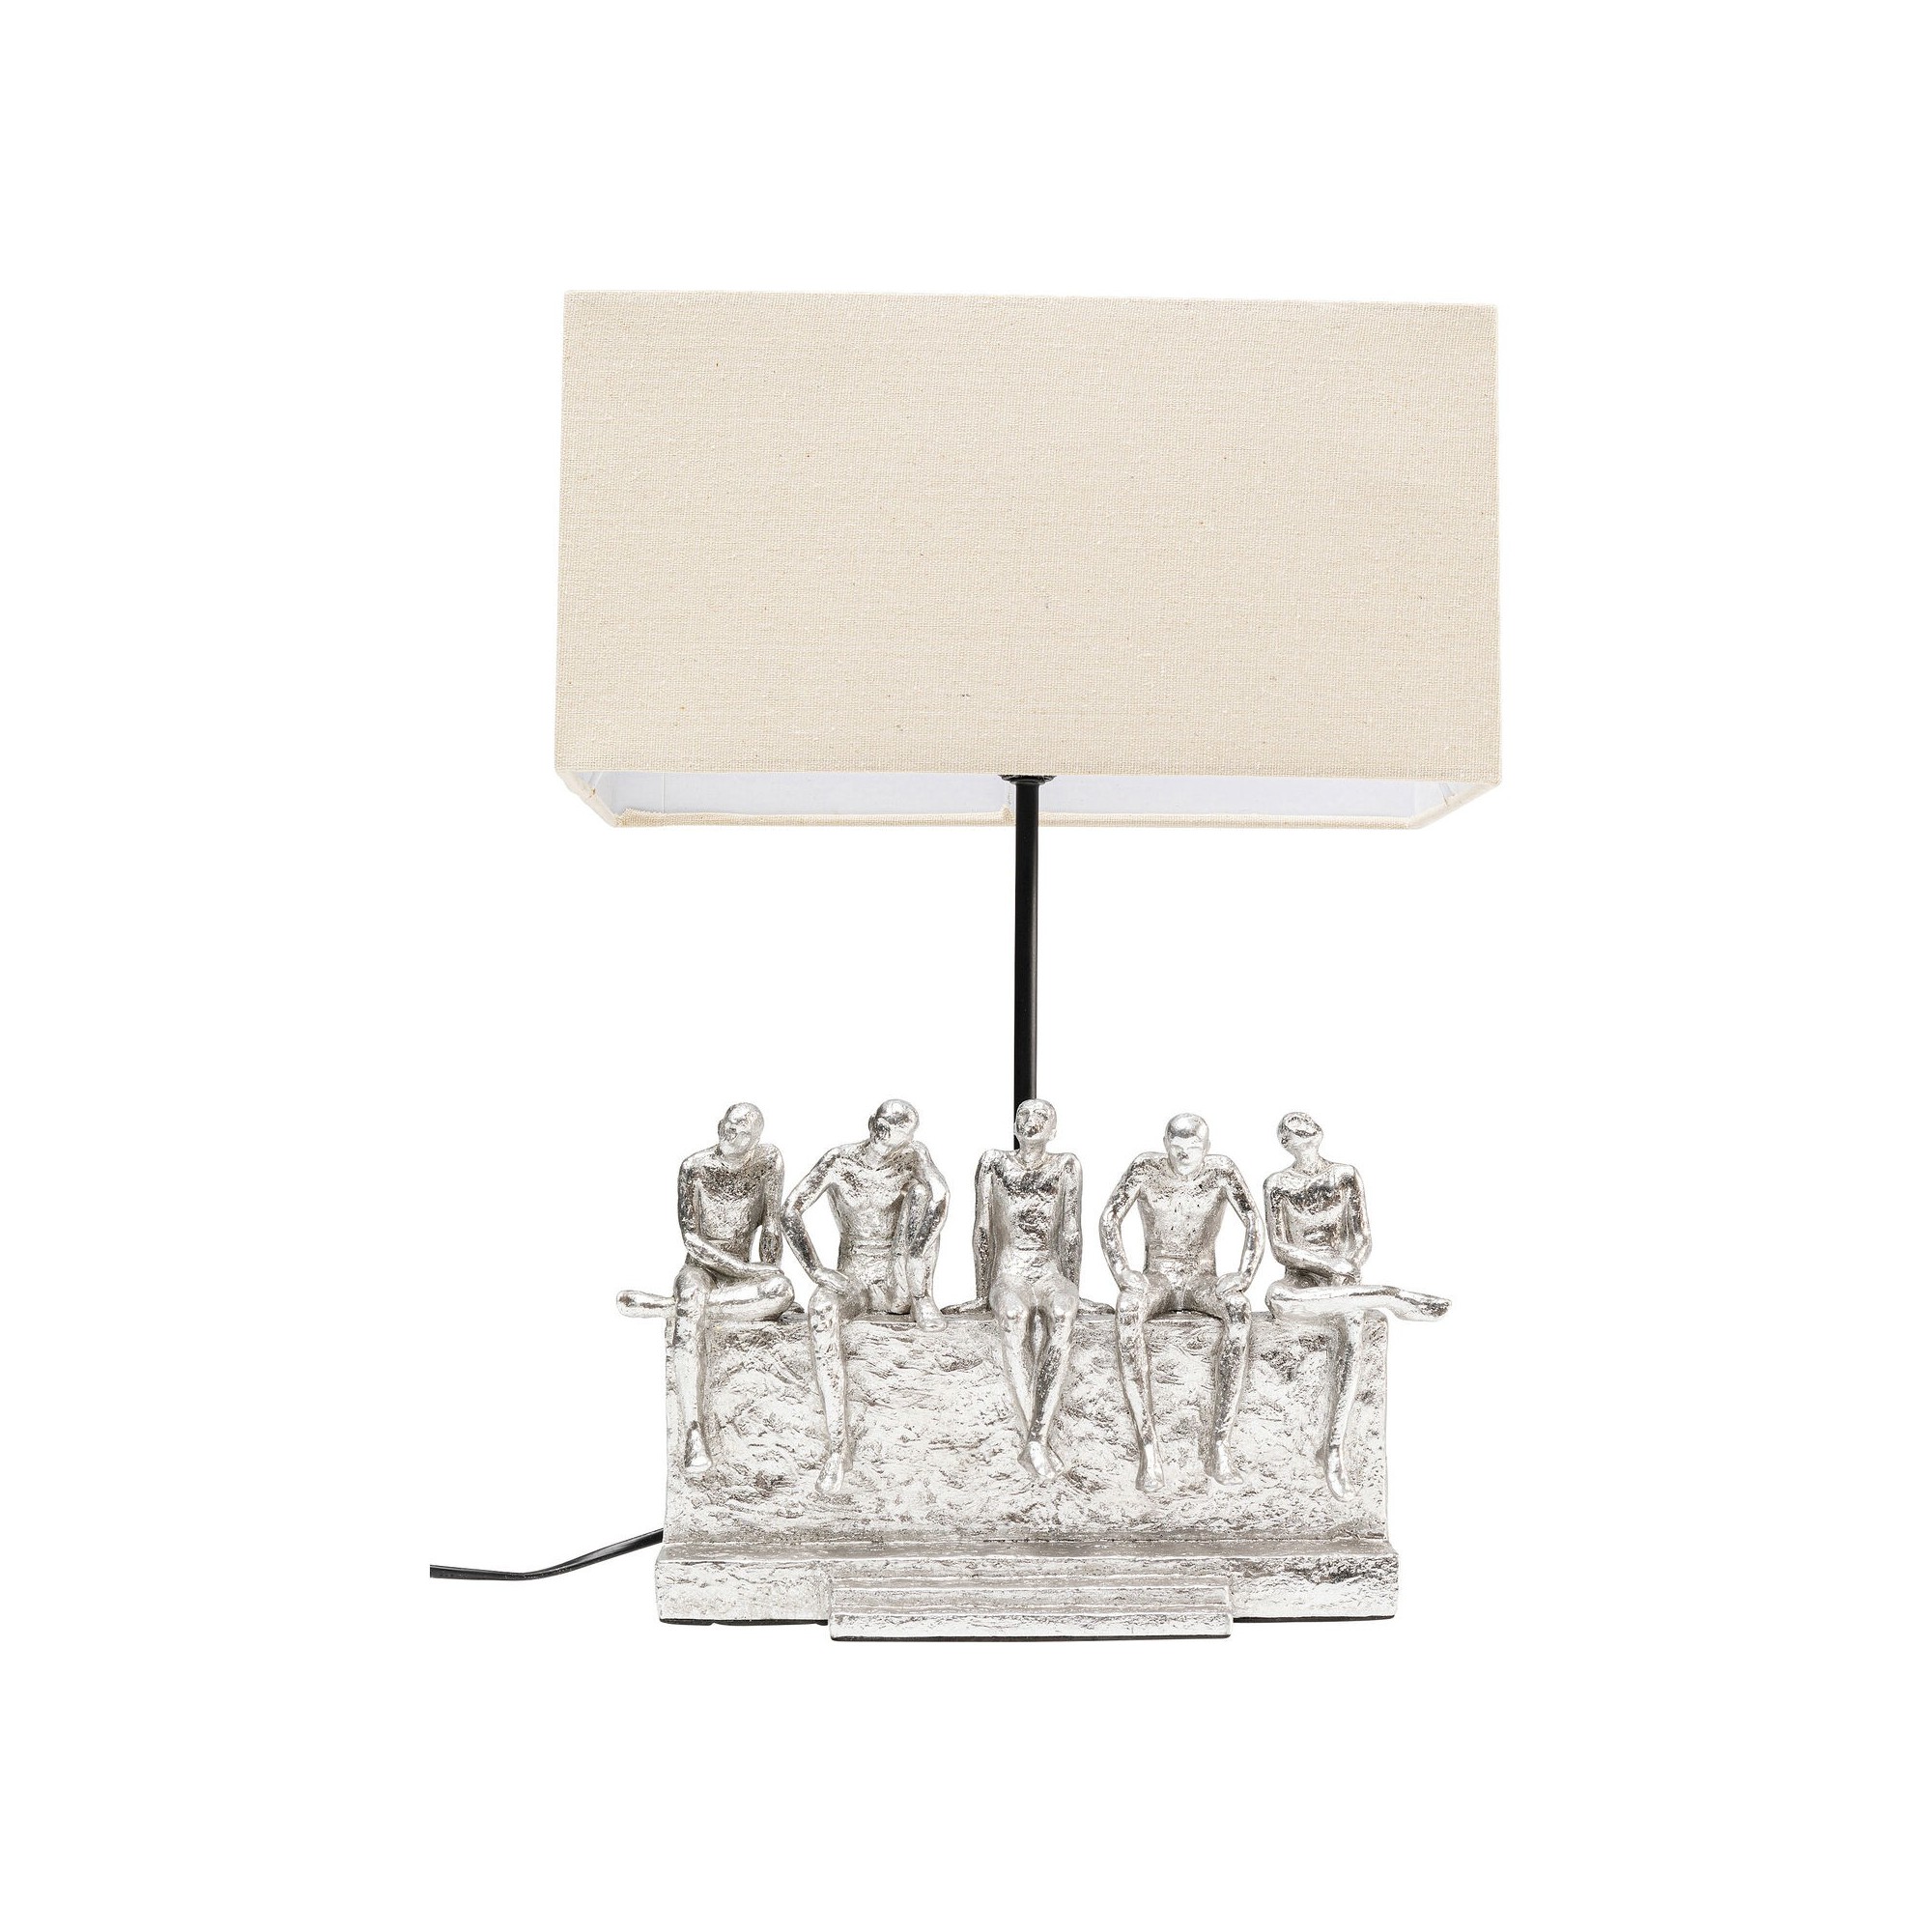 Lampe NY Workers Kare Design